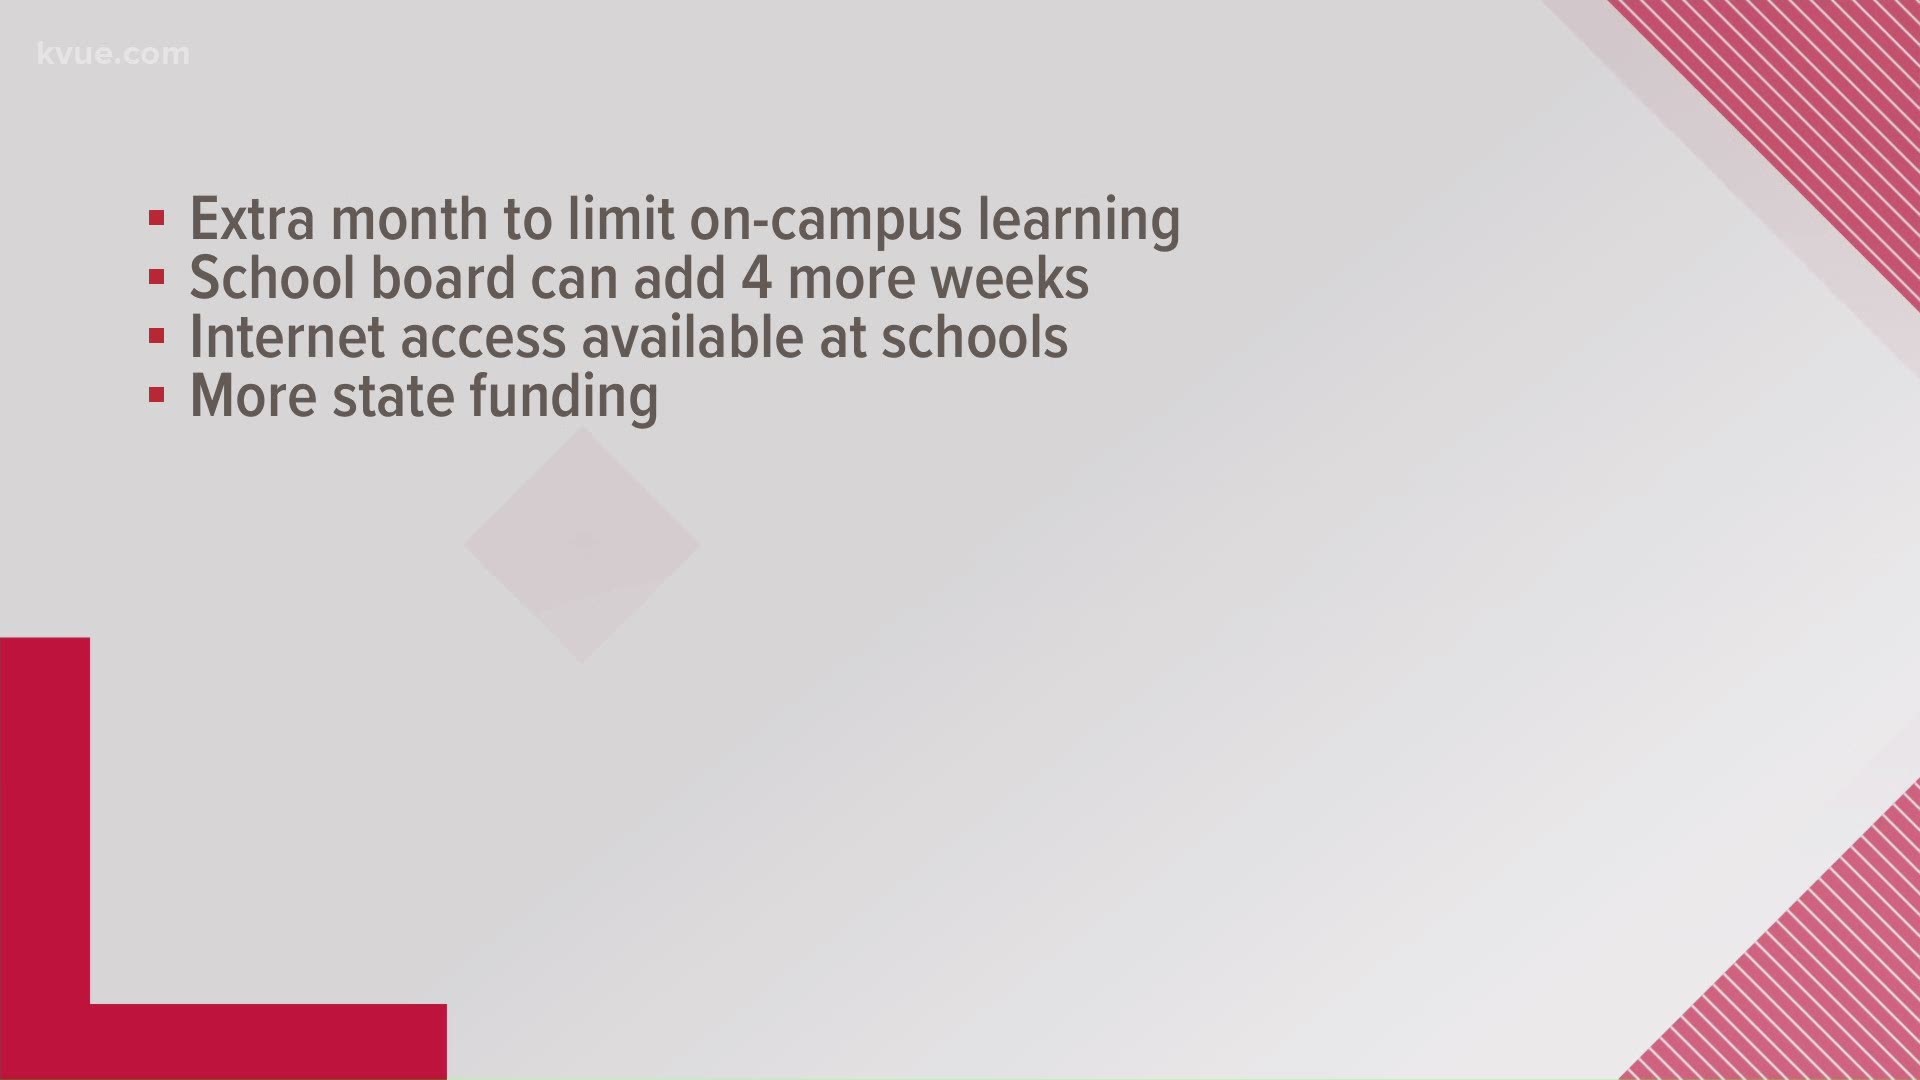 Schools can continue to limit access to on-campus classes for an additional four weeks if needed.